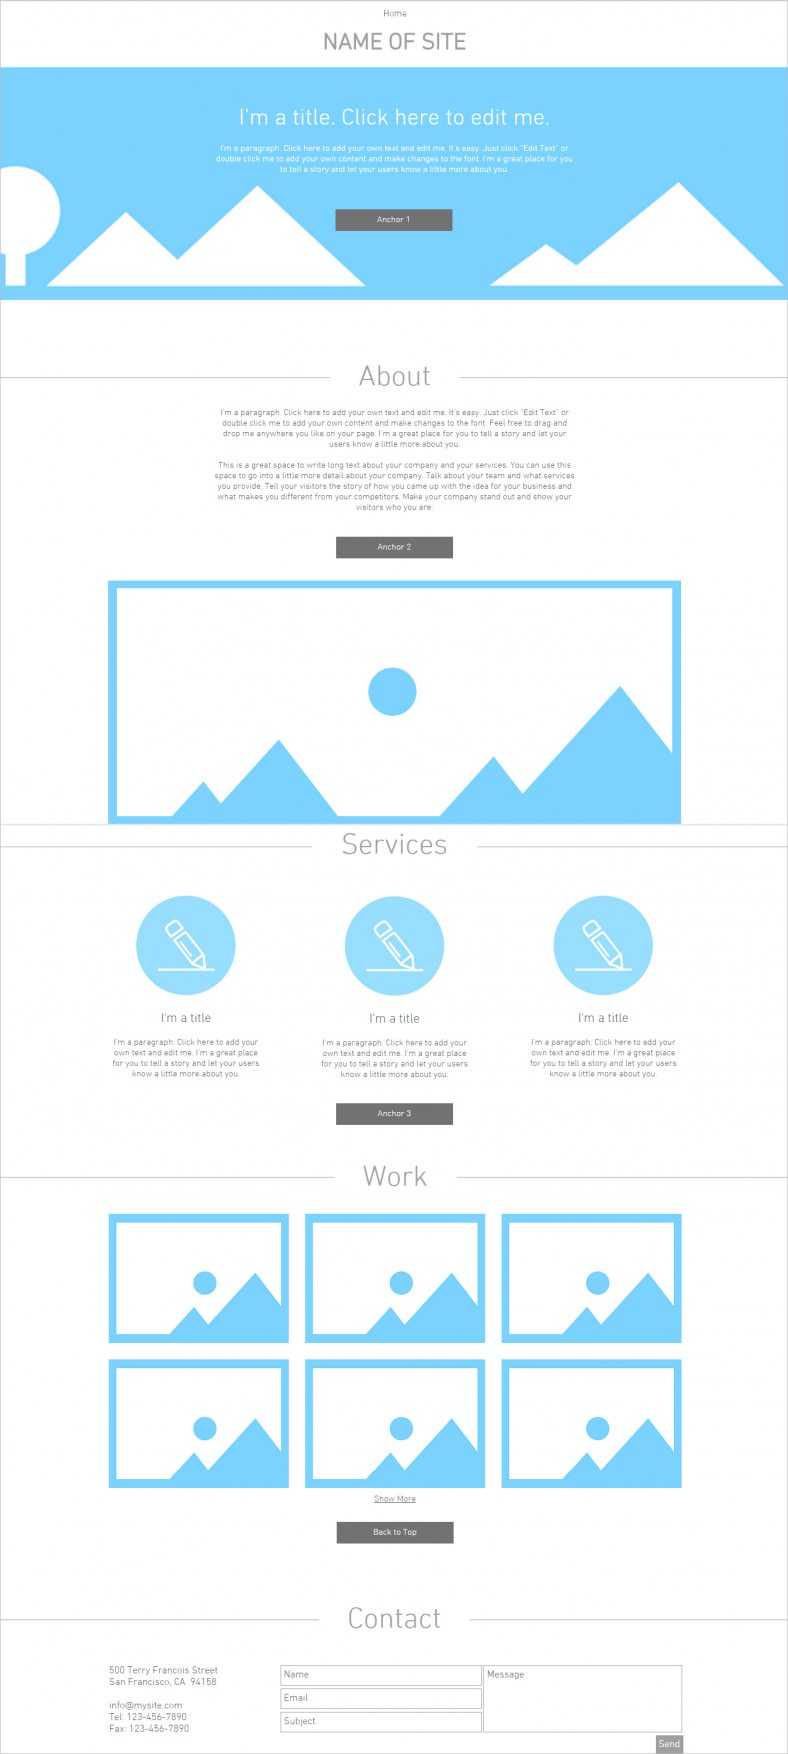 Blank Html5 Website Templates & Themes | Free & Premium For Html5 Blank Page Template